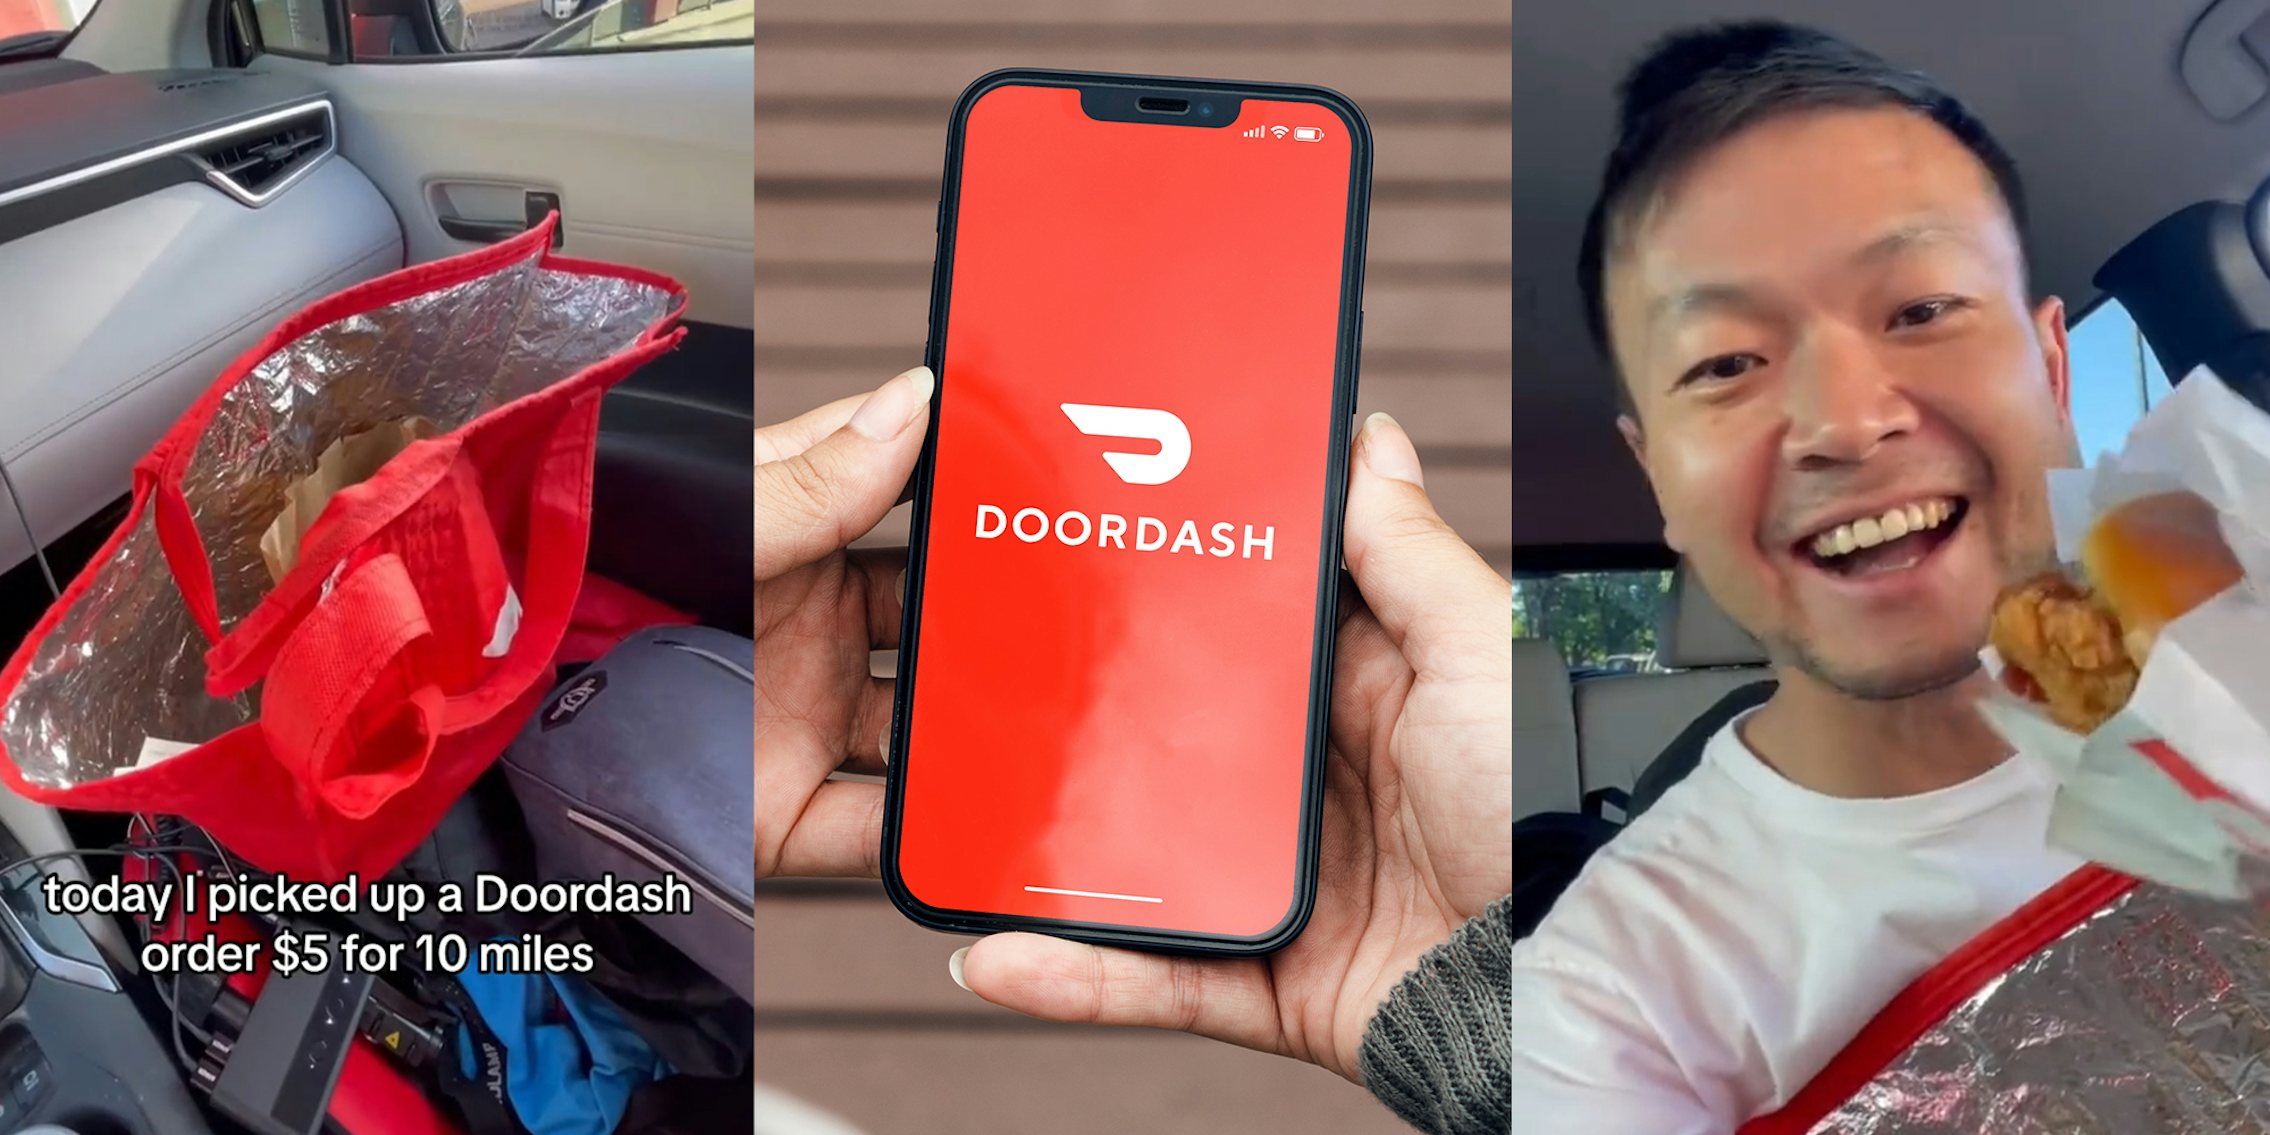 Driver says he lied to DoorDash support about having flat tire so he could eat no-tipper's chicken sandwich